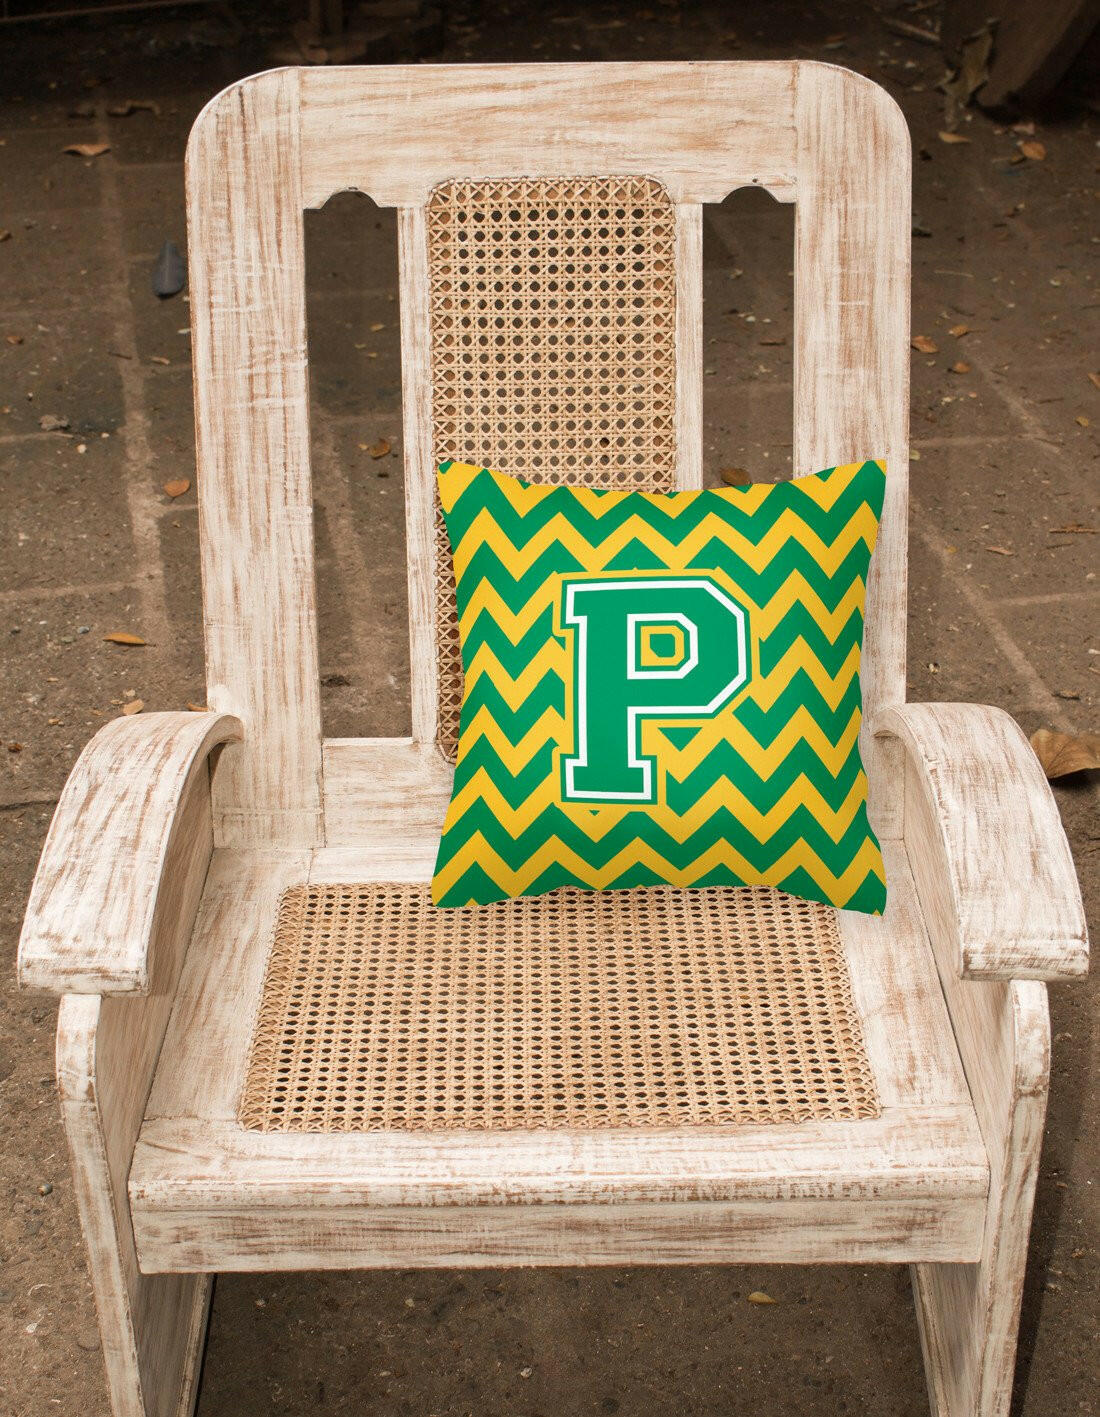 Letter P Chevron Green and Gold Fabric Decorative Pillow CJ1059-PPW1414 by Caroline's Treasures